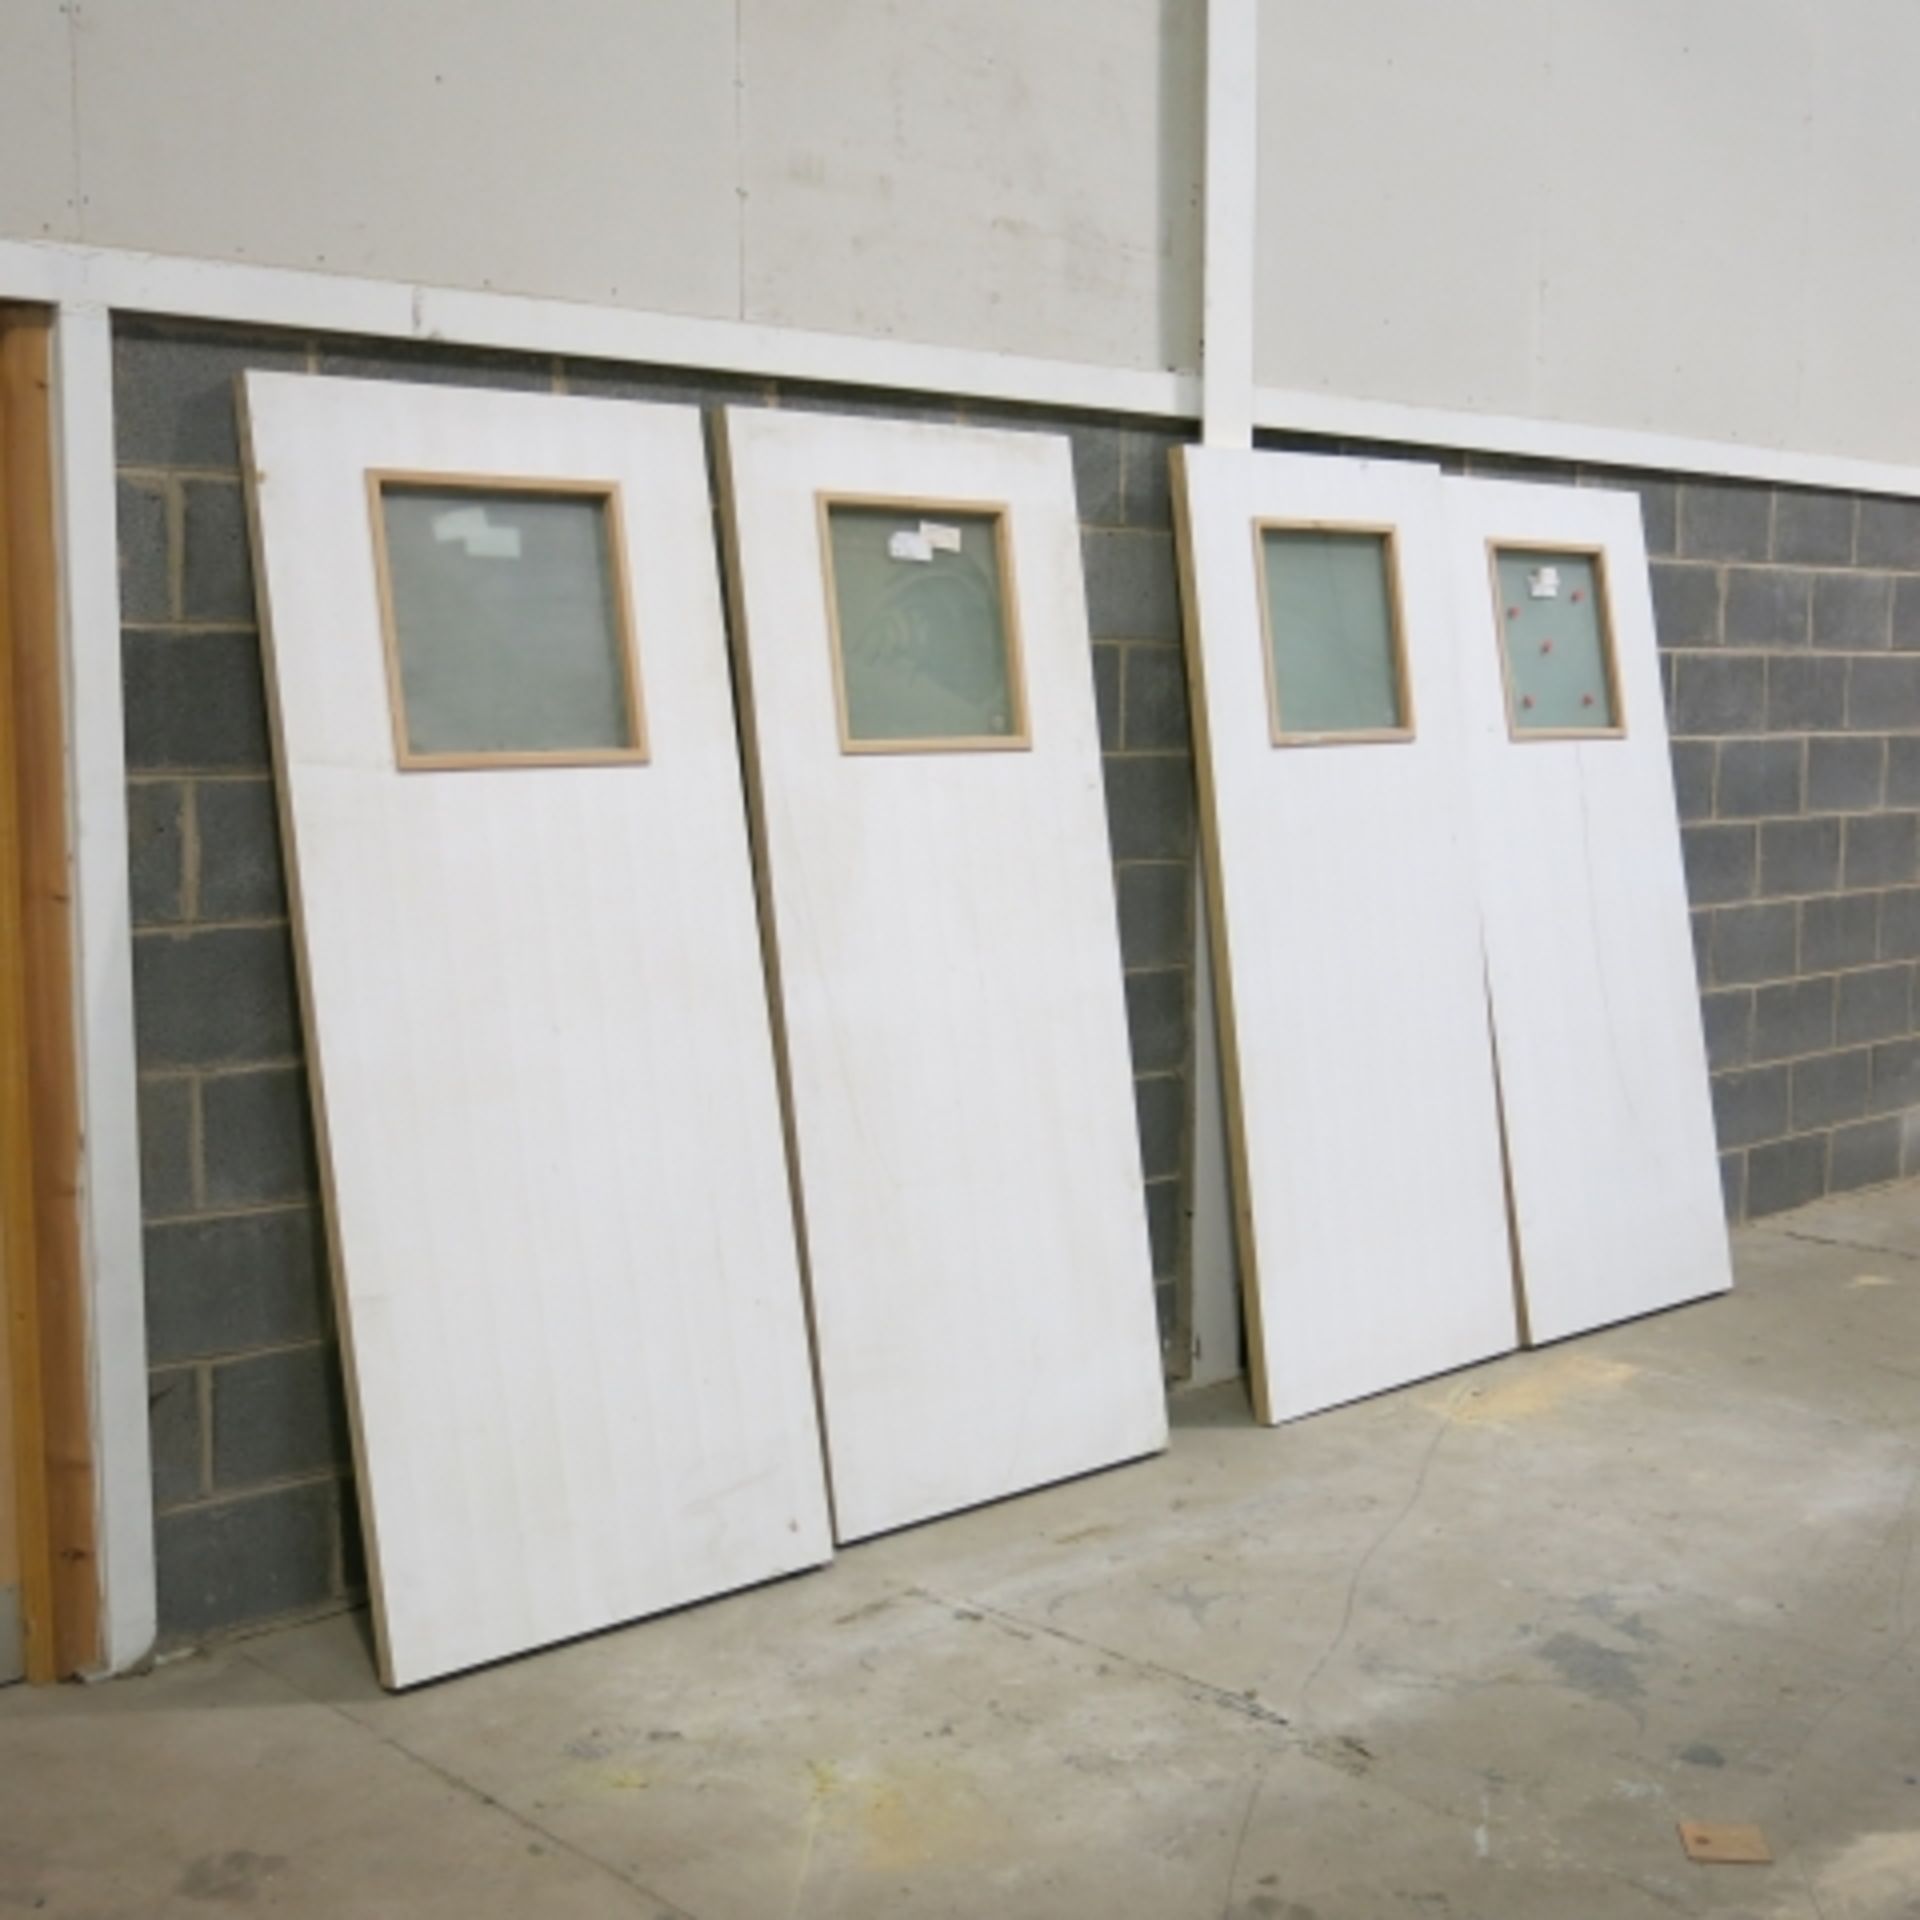 * 5 x Various Partially Glazed Firedoors; an Unused Jeldwen Four Panel Door and a Similar Used - Image 2 of 2